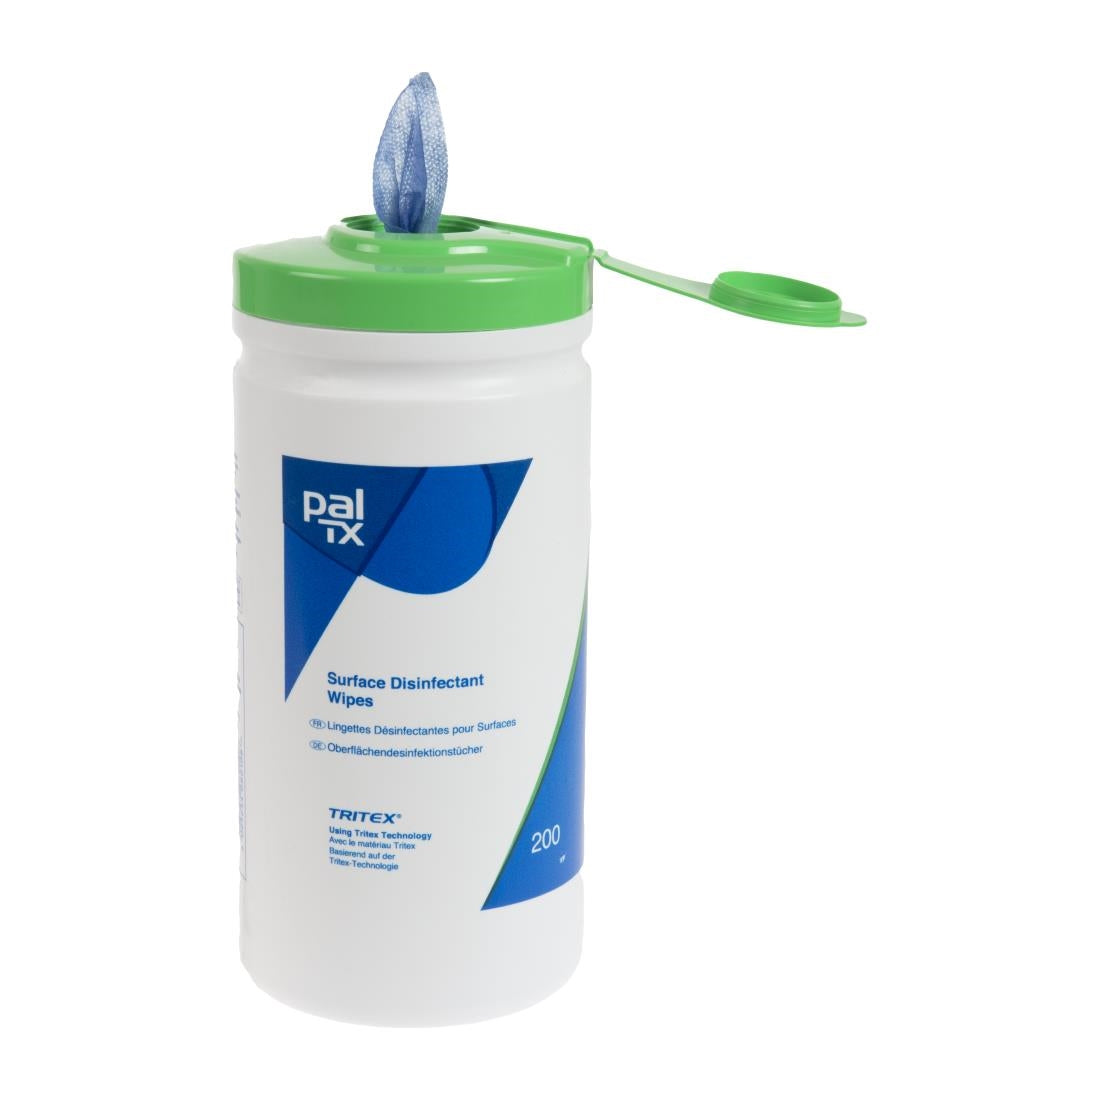 CC197 Pal TX Disinfectant Surface Wipes (200 Pack)